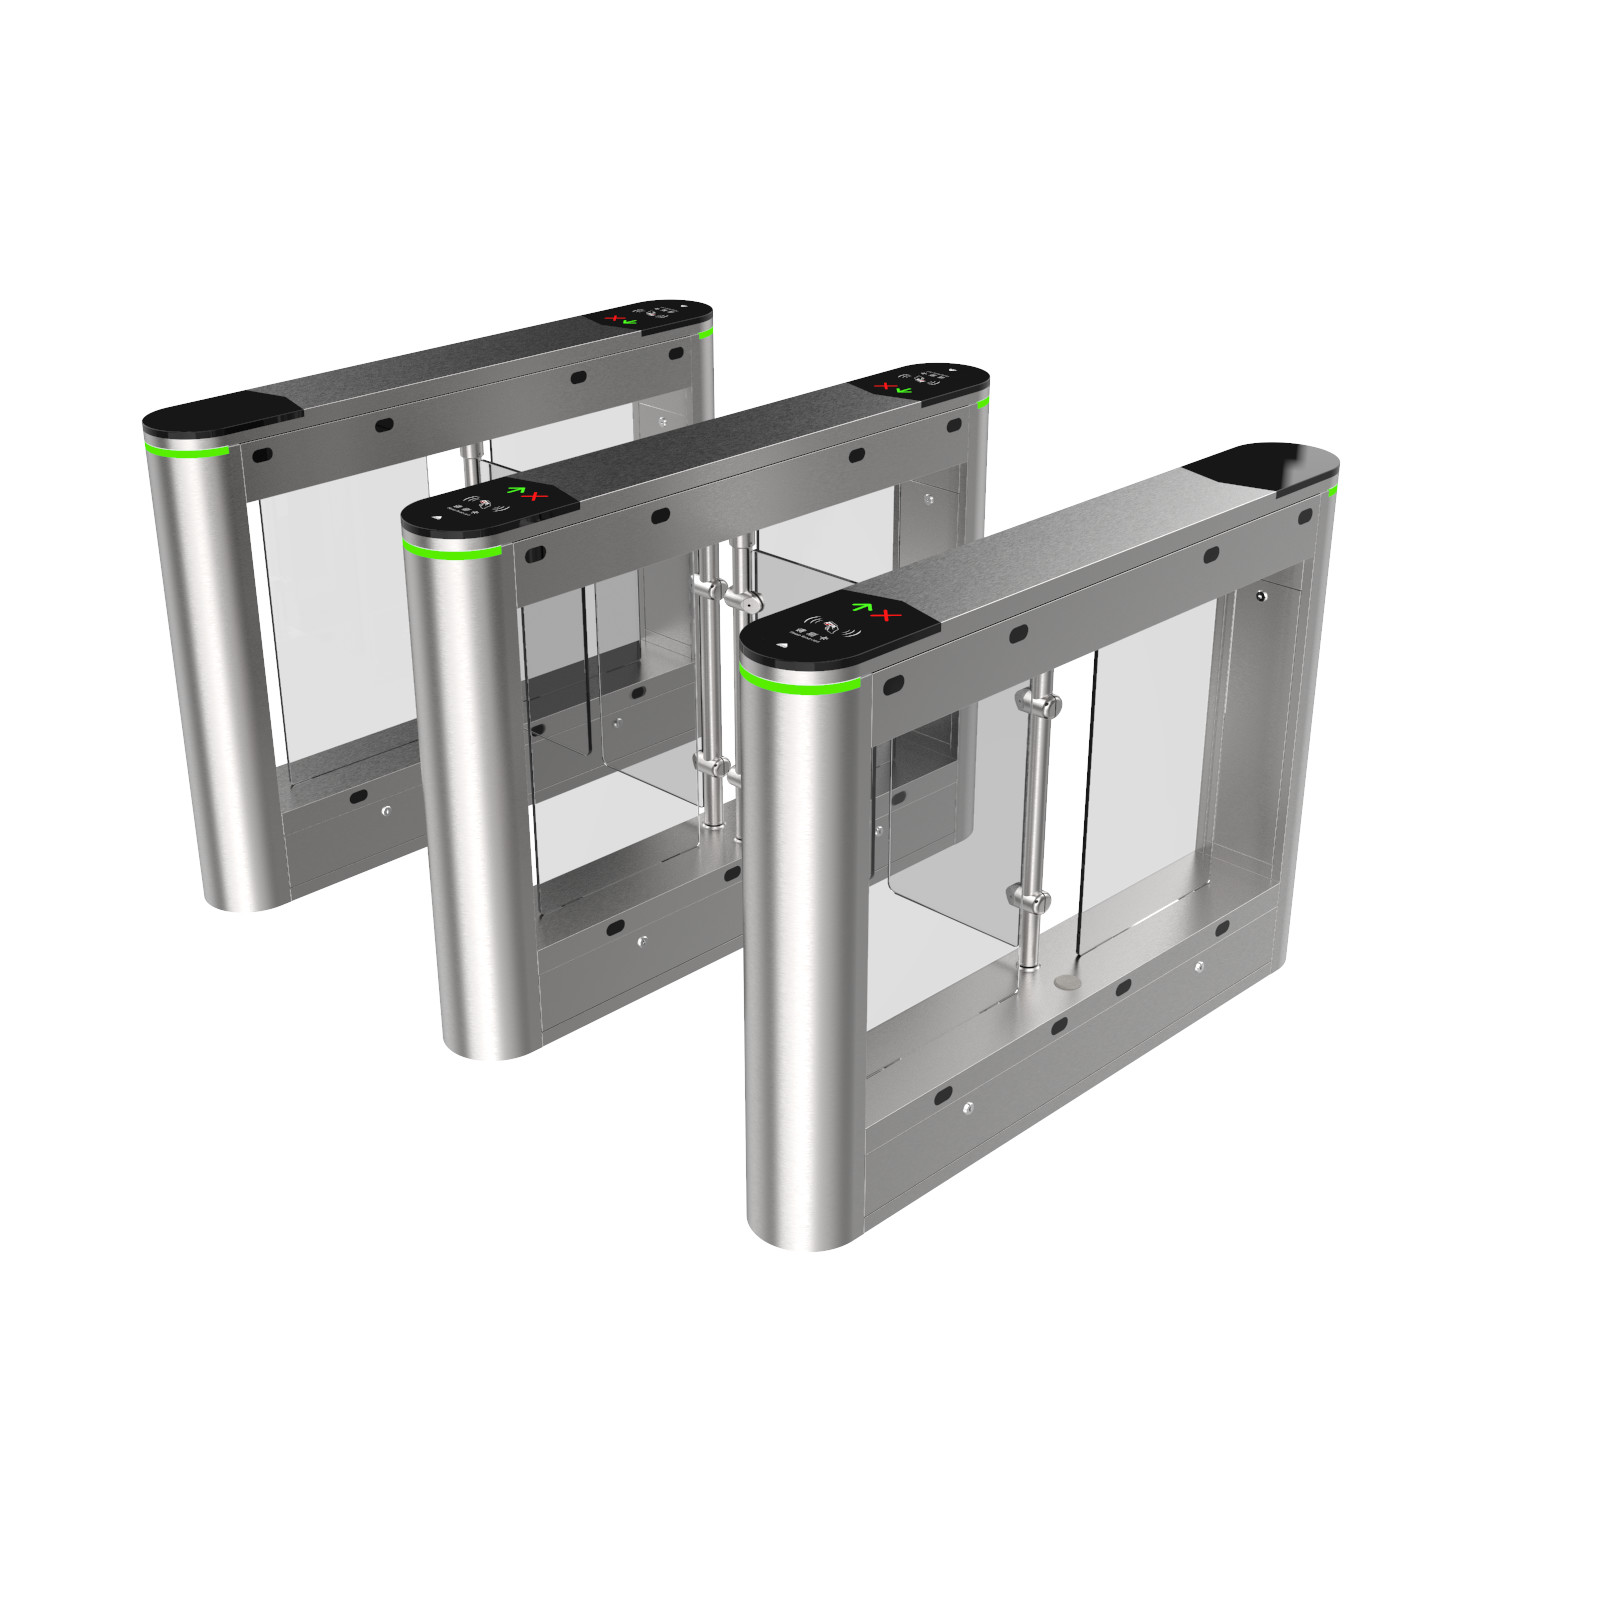 SUS304 Stainless Steel Swing Gate Access Intelligent Control With IC Card And Face Recognition